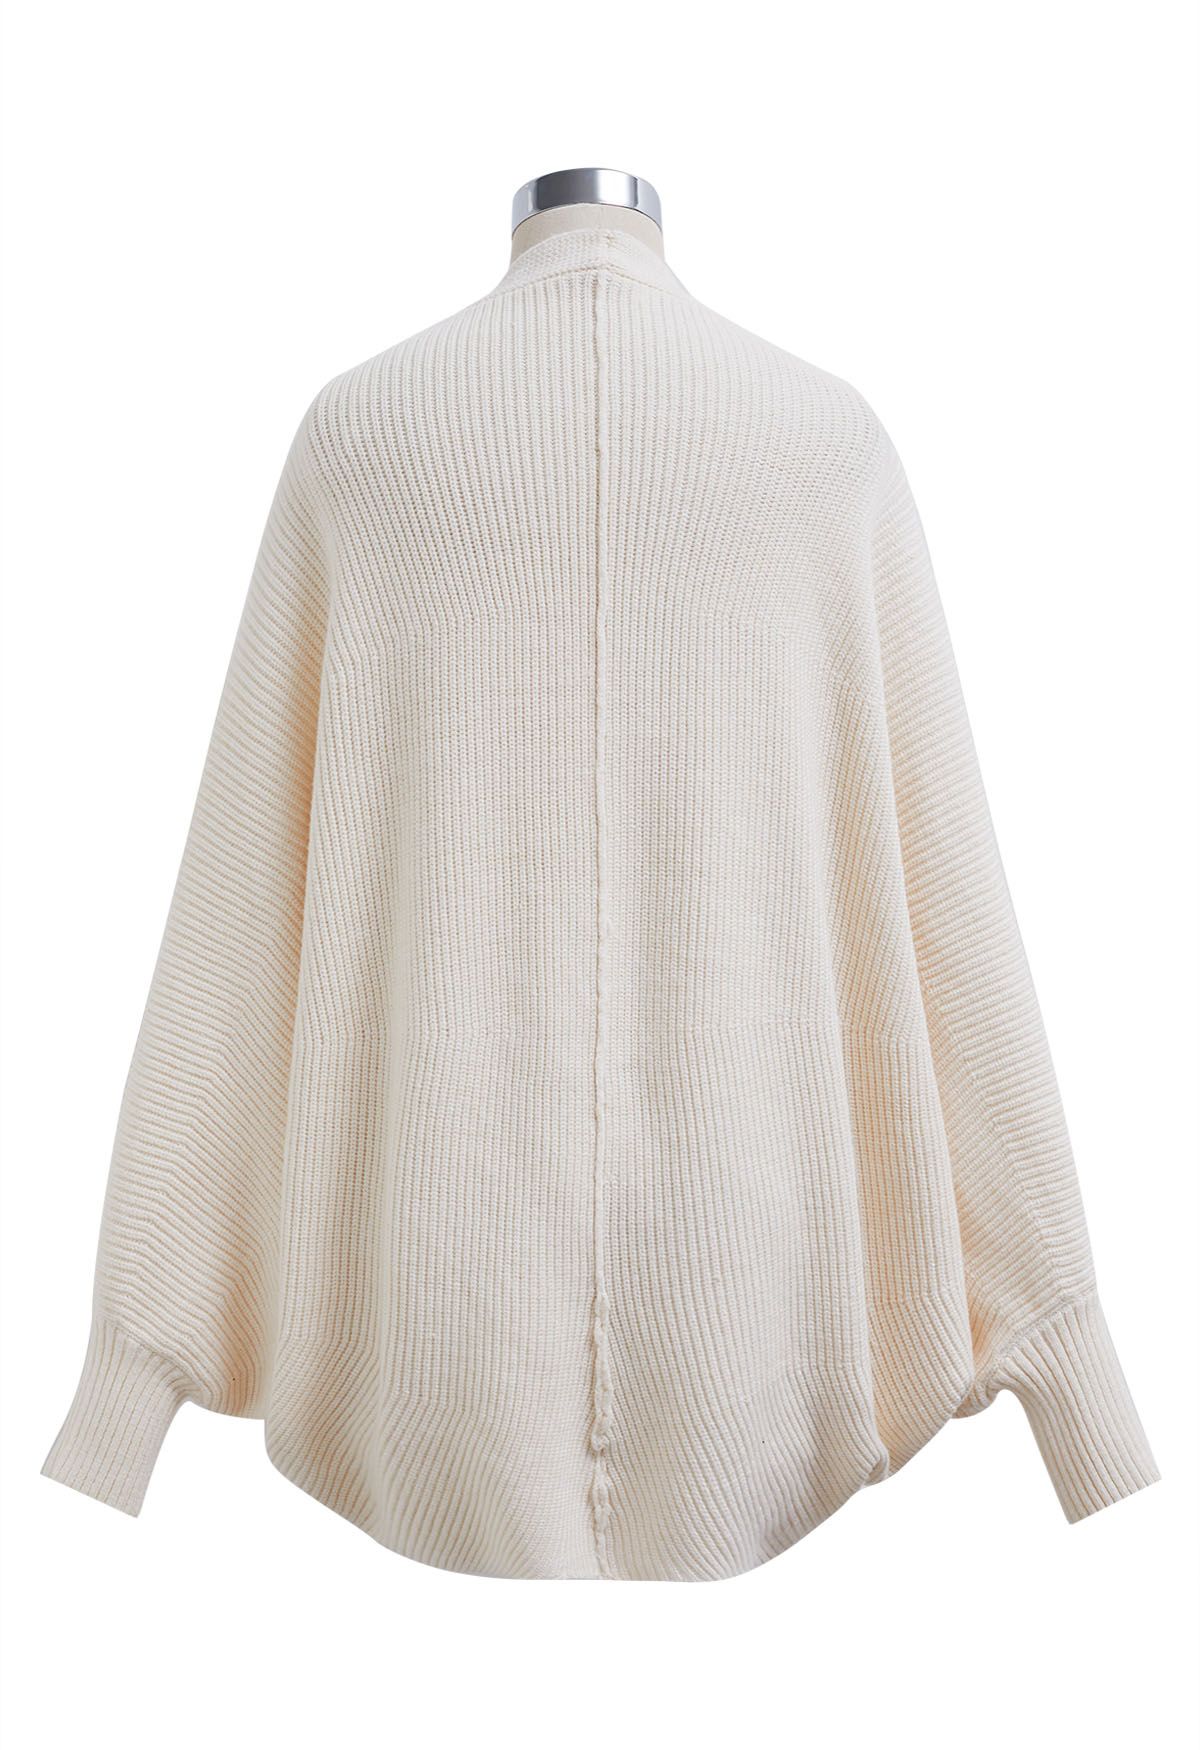 Batwing Sleeves Open Front Knit Cardigan in Ivory